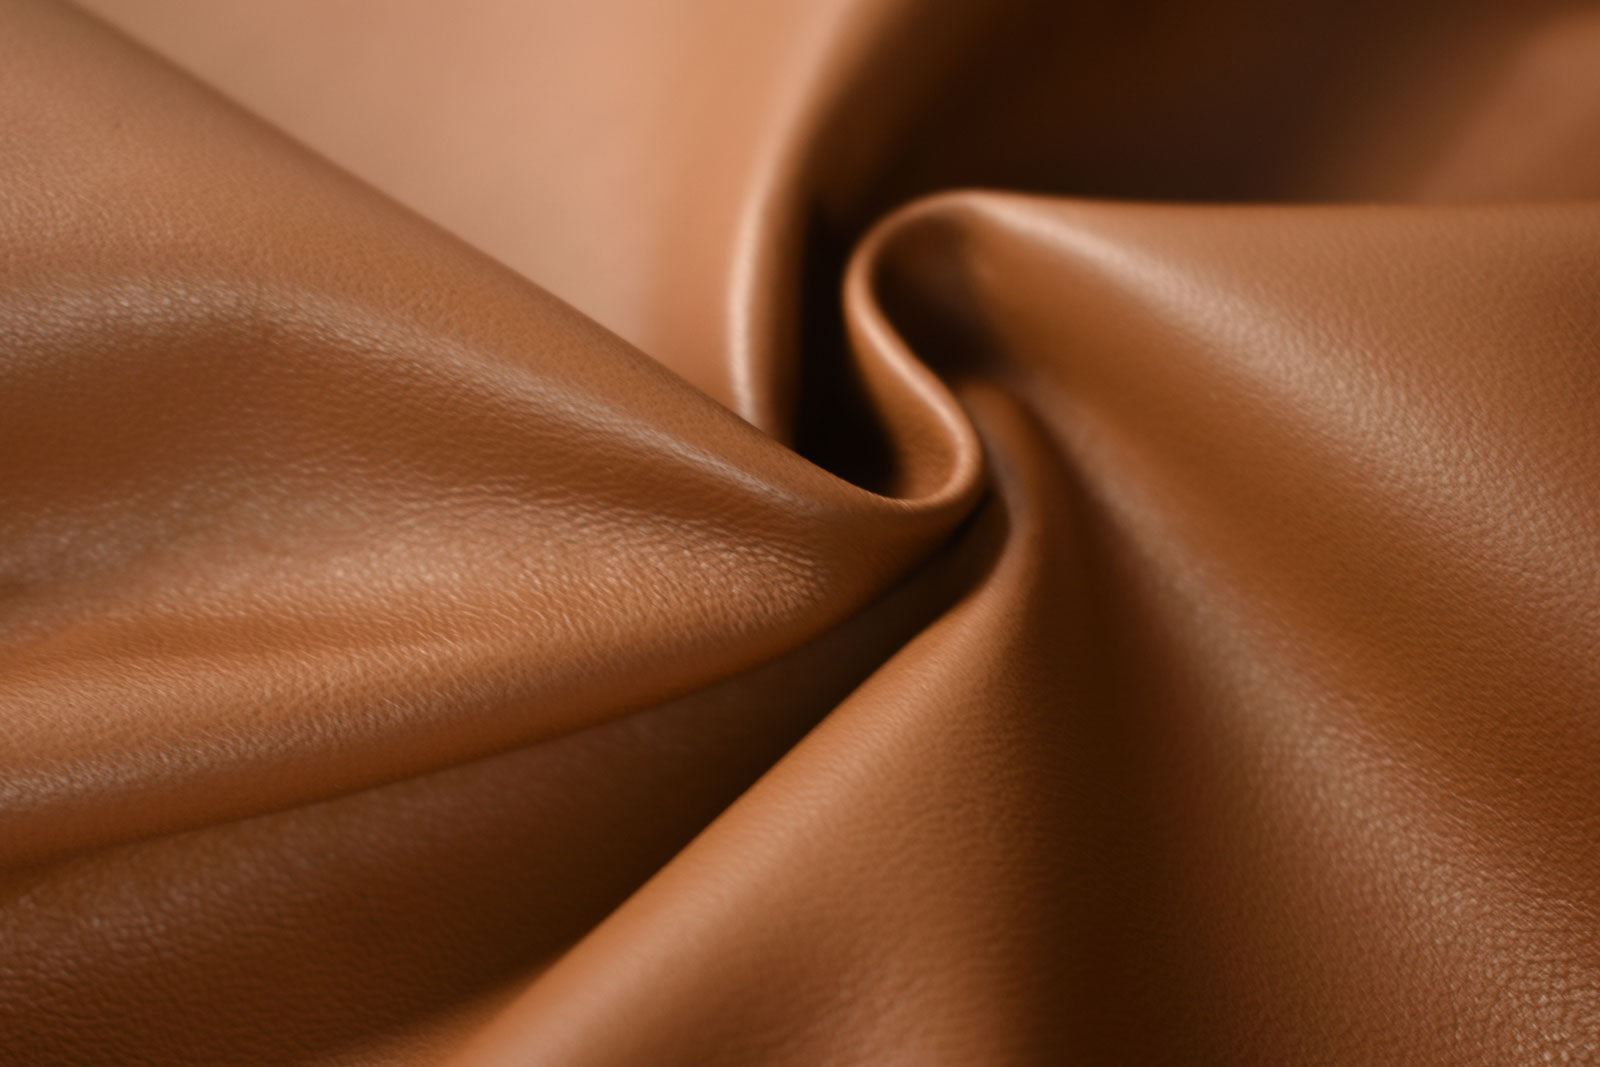 Saddle Tan Lambskin hides, a close-up of buttery soft brown leather. Ideal for couture fashion and crafting projects. 8-10 sq ft sizes available.